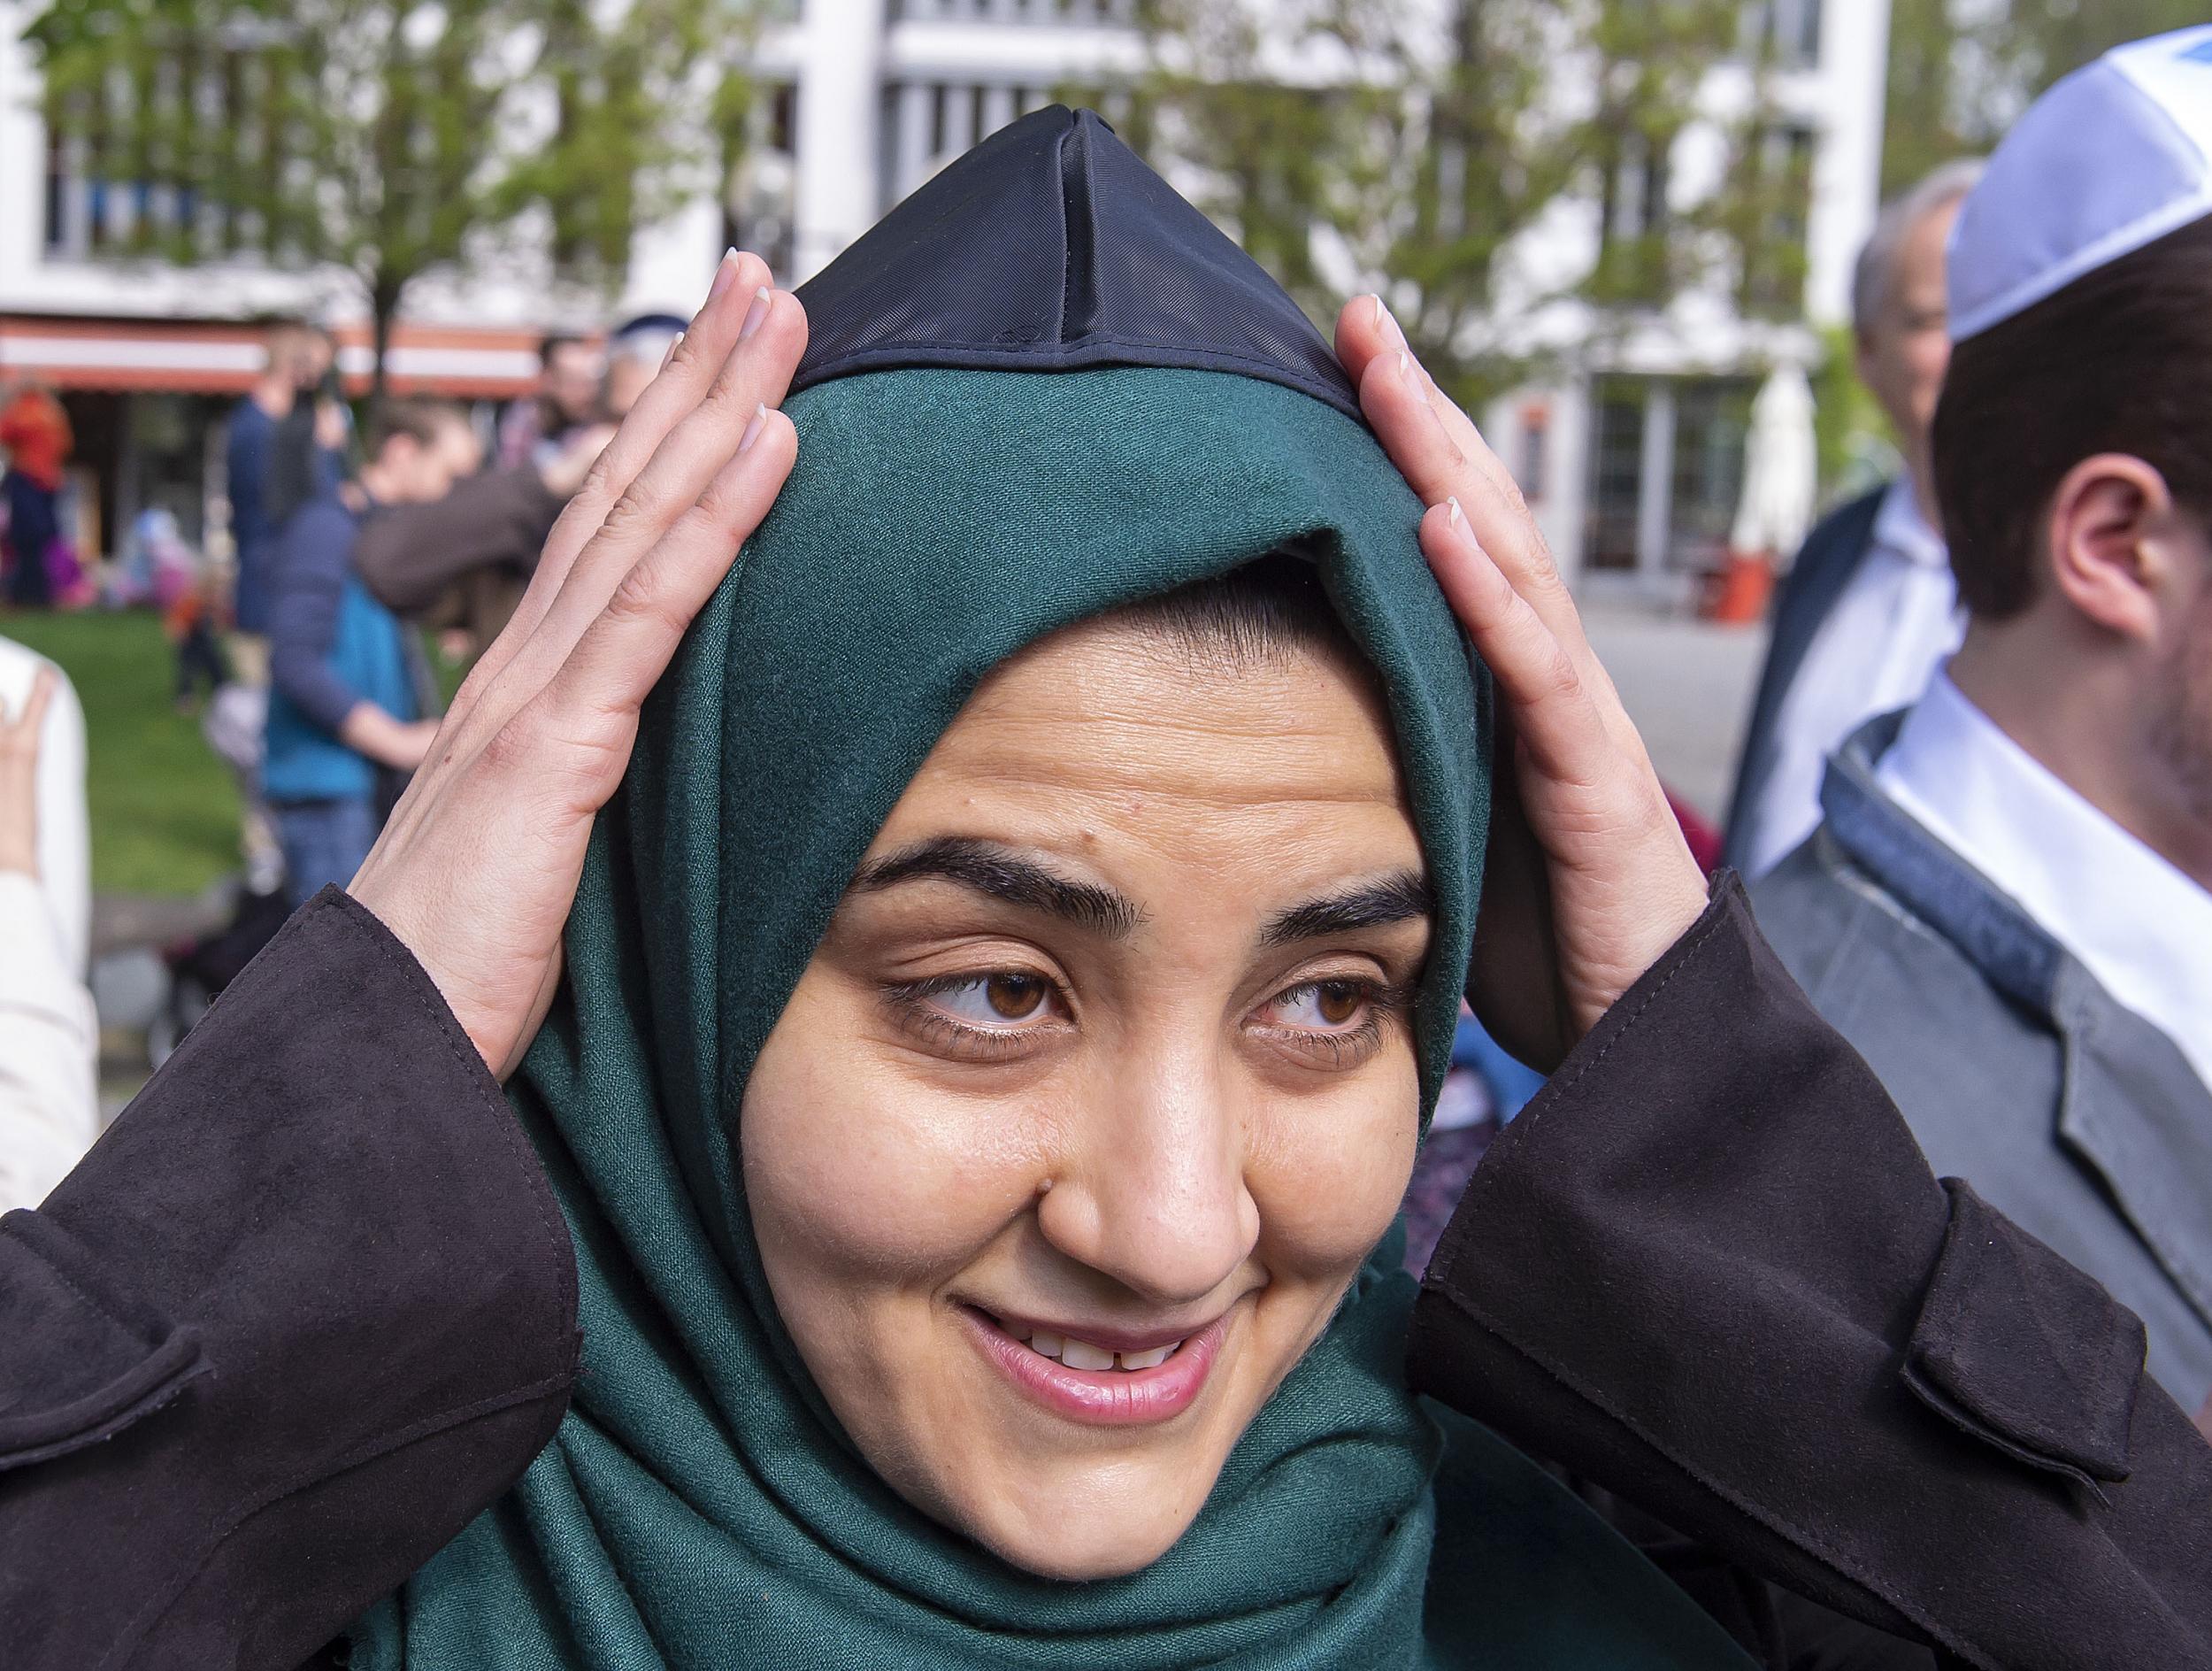 Muslim women wear kippahs over their hijabs in solidarity with Jewish community after antisemitic attack The Independent The Independent